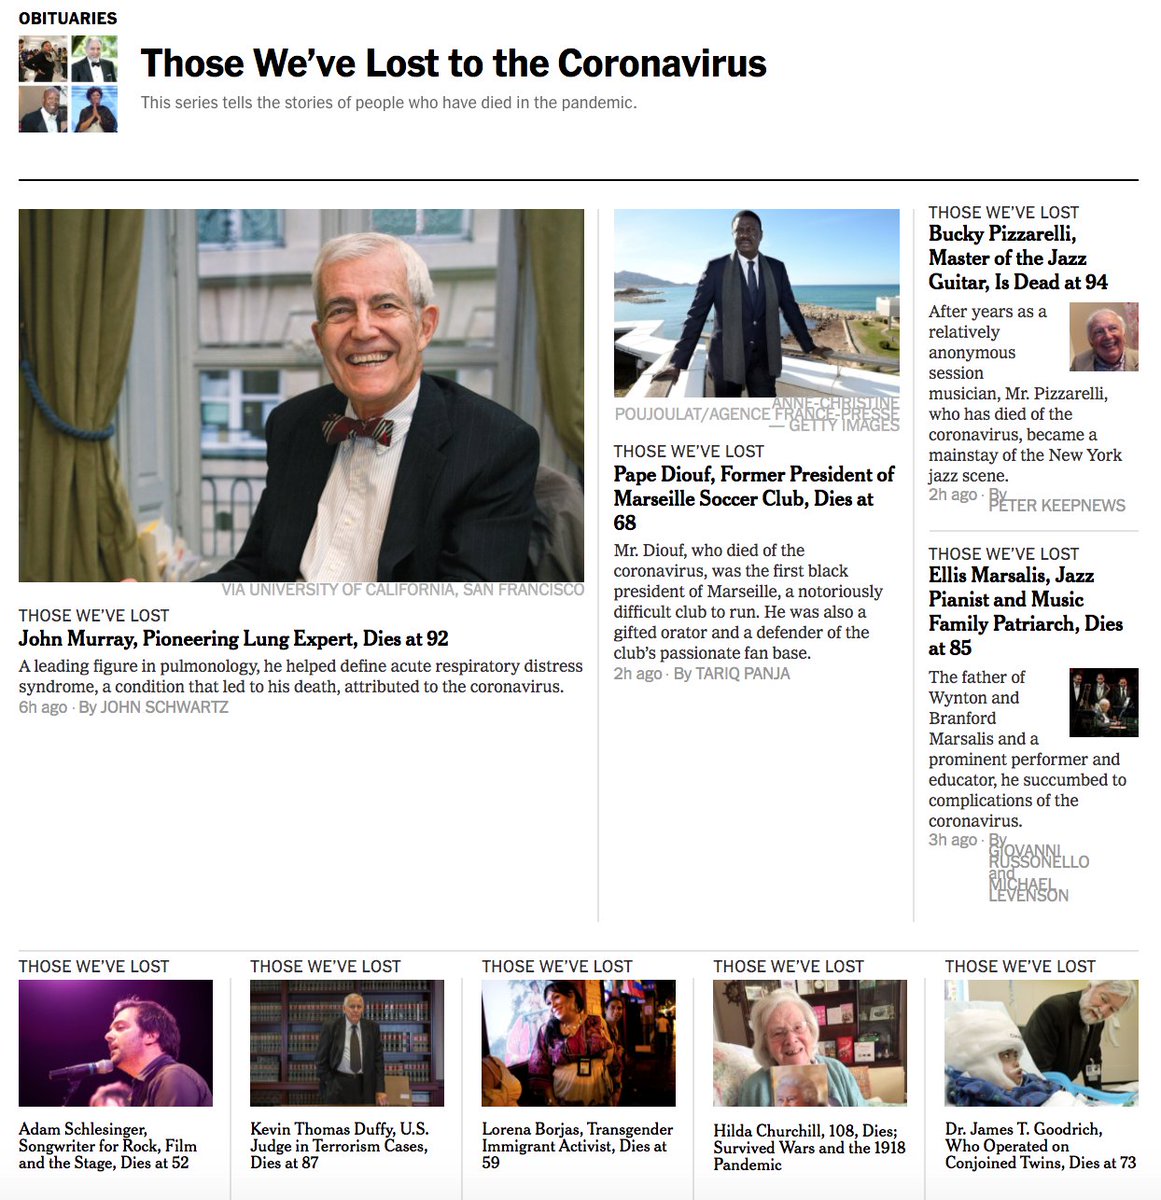 8/ To appreciate vastness of tragedy, 1 need only scan new  @nytimes “Those We’ve Lost [from Covid]” page  https://nyti.ms/2R8Mdse  Today lists 32 amazing people: musicians, activists, diplomats, athletes... ages 30-108. Alas, we’re closer to beginning than end of thisStay safe…